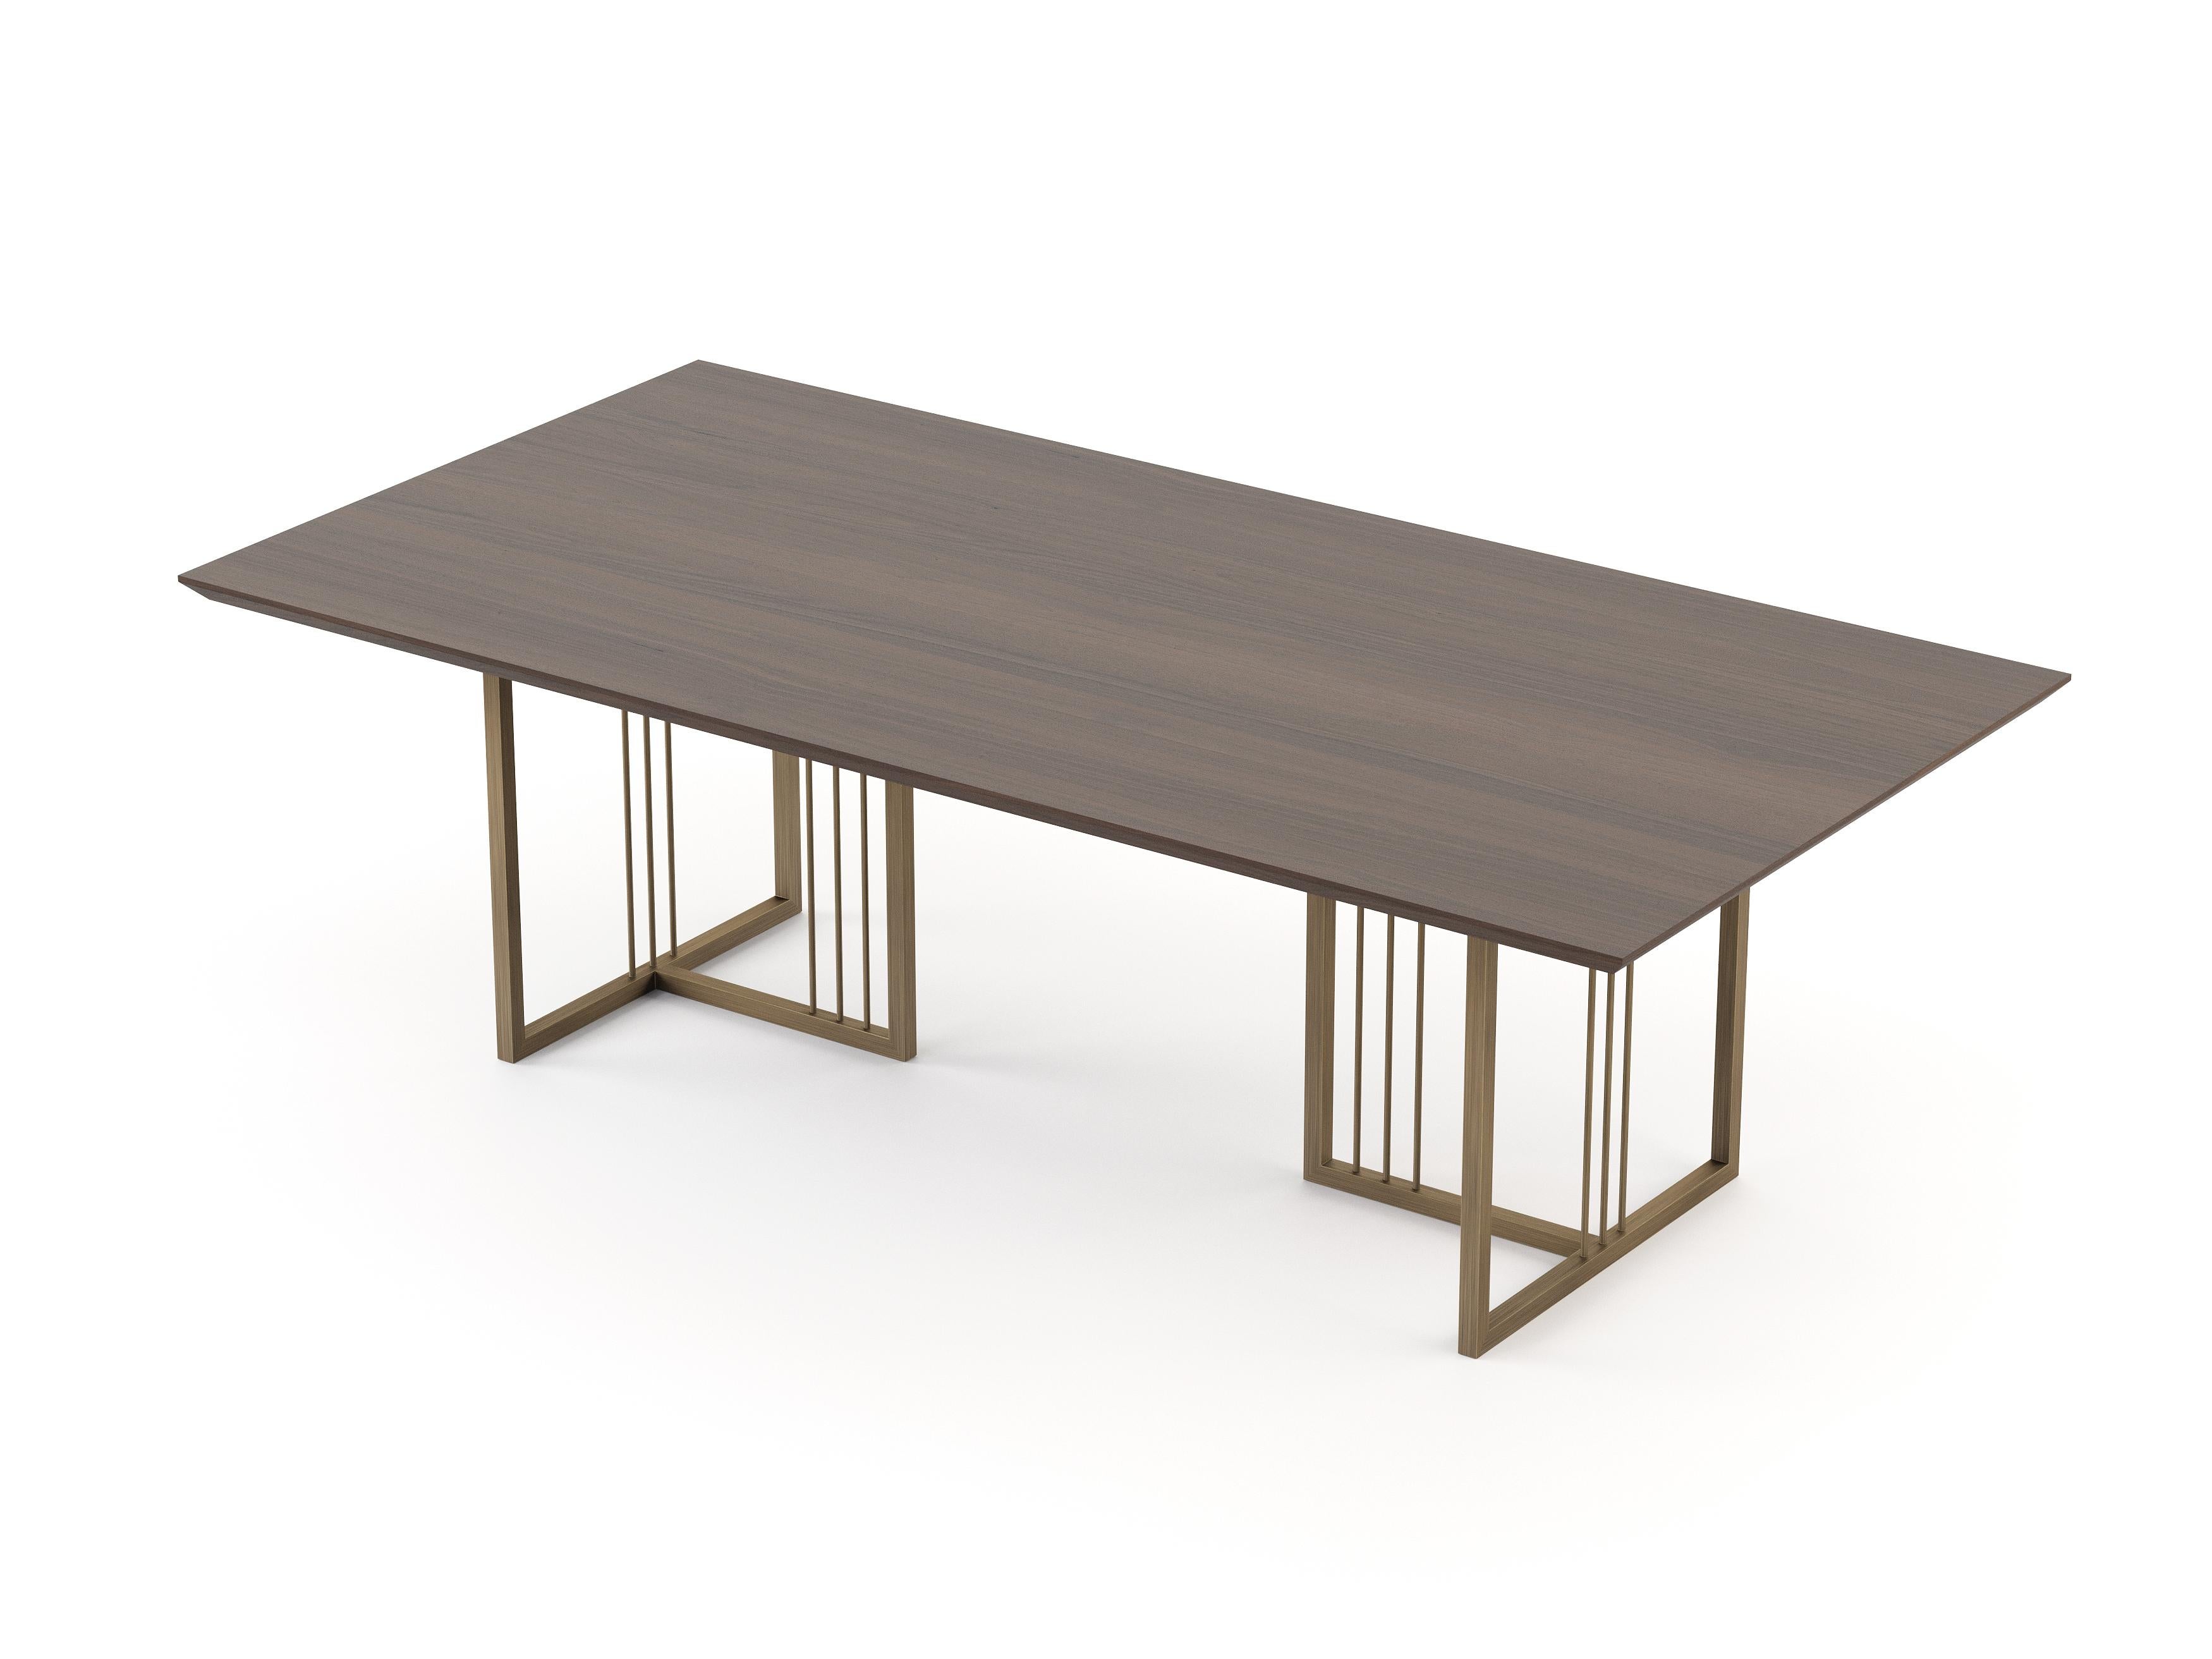 Neoclassical Scandinavian Modern Porto Dining Table Made with Walnut and Iron by Stylish Club For Sale